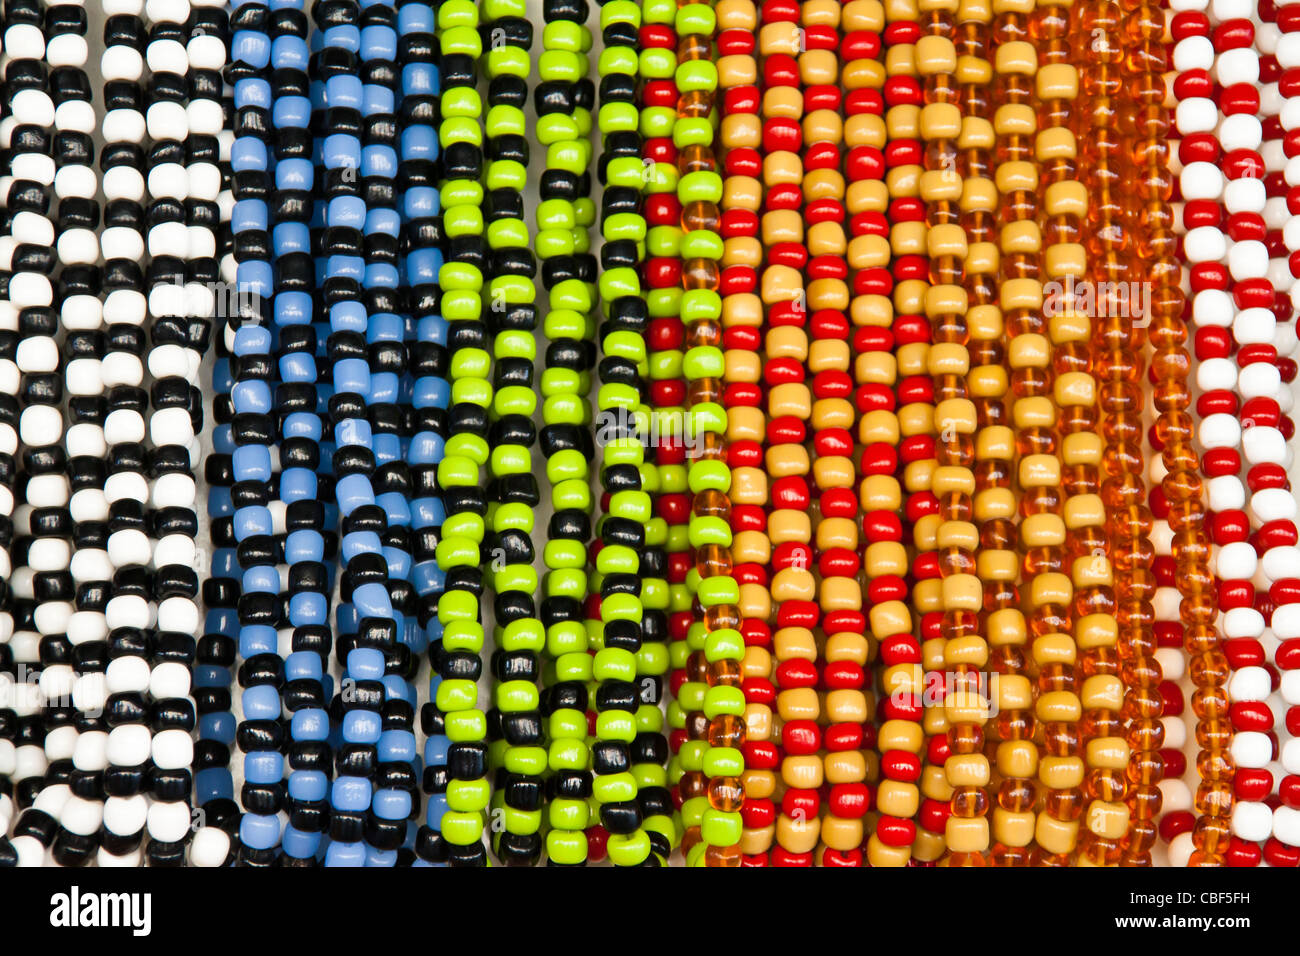 Different colored glass beads hanging in a row Stock Photo